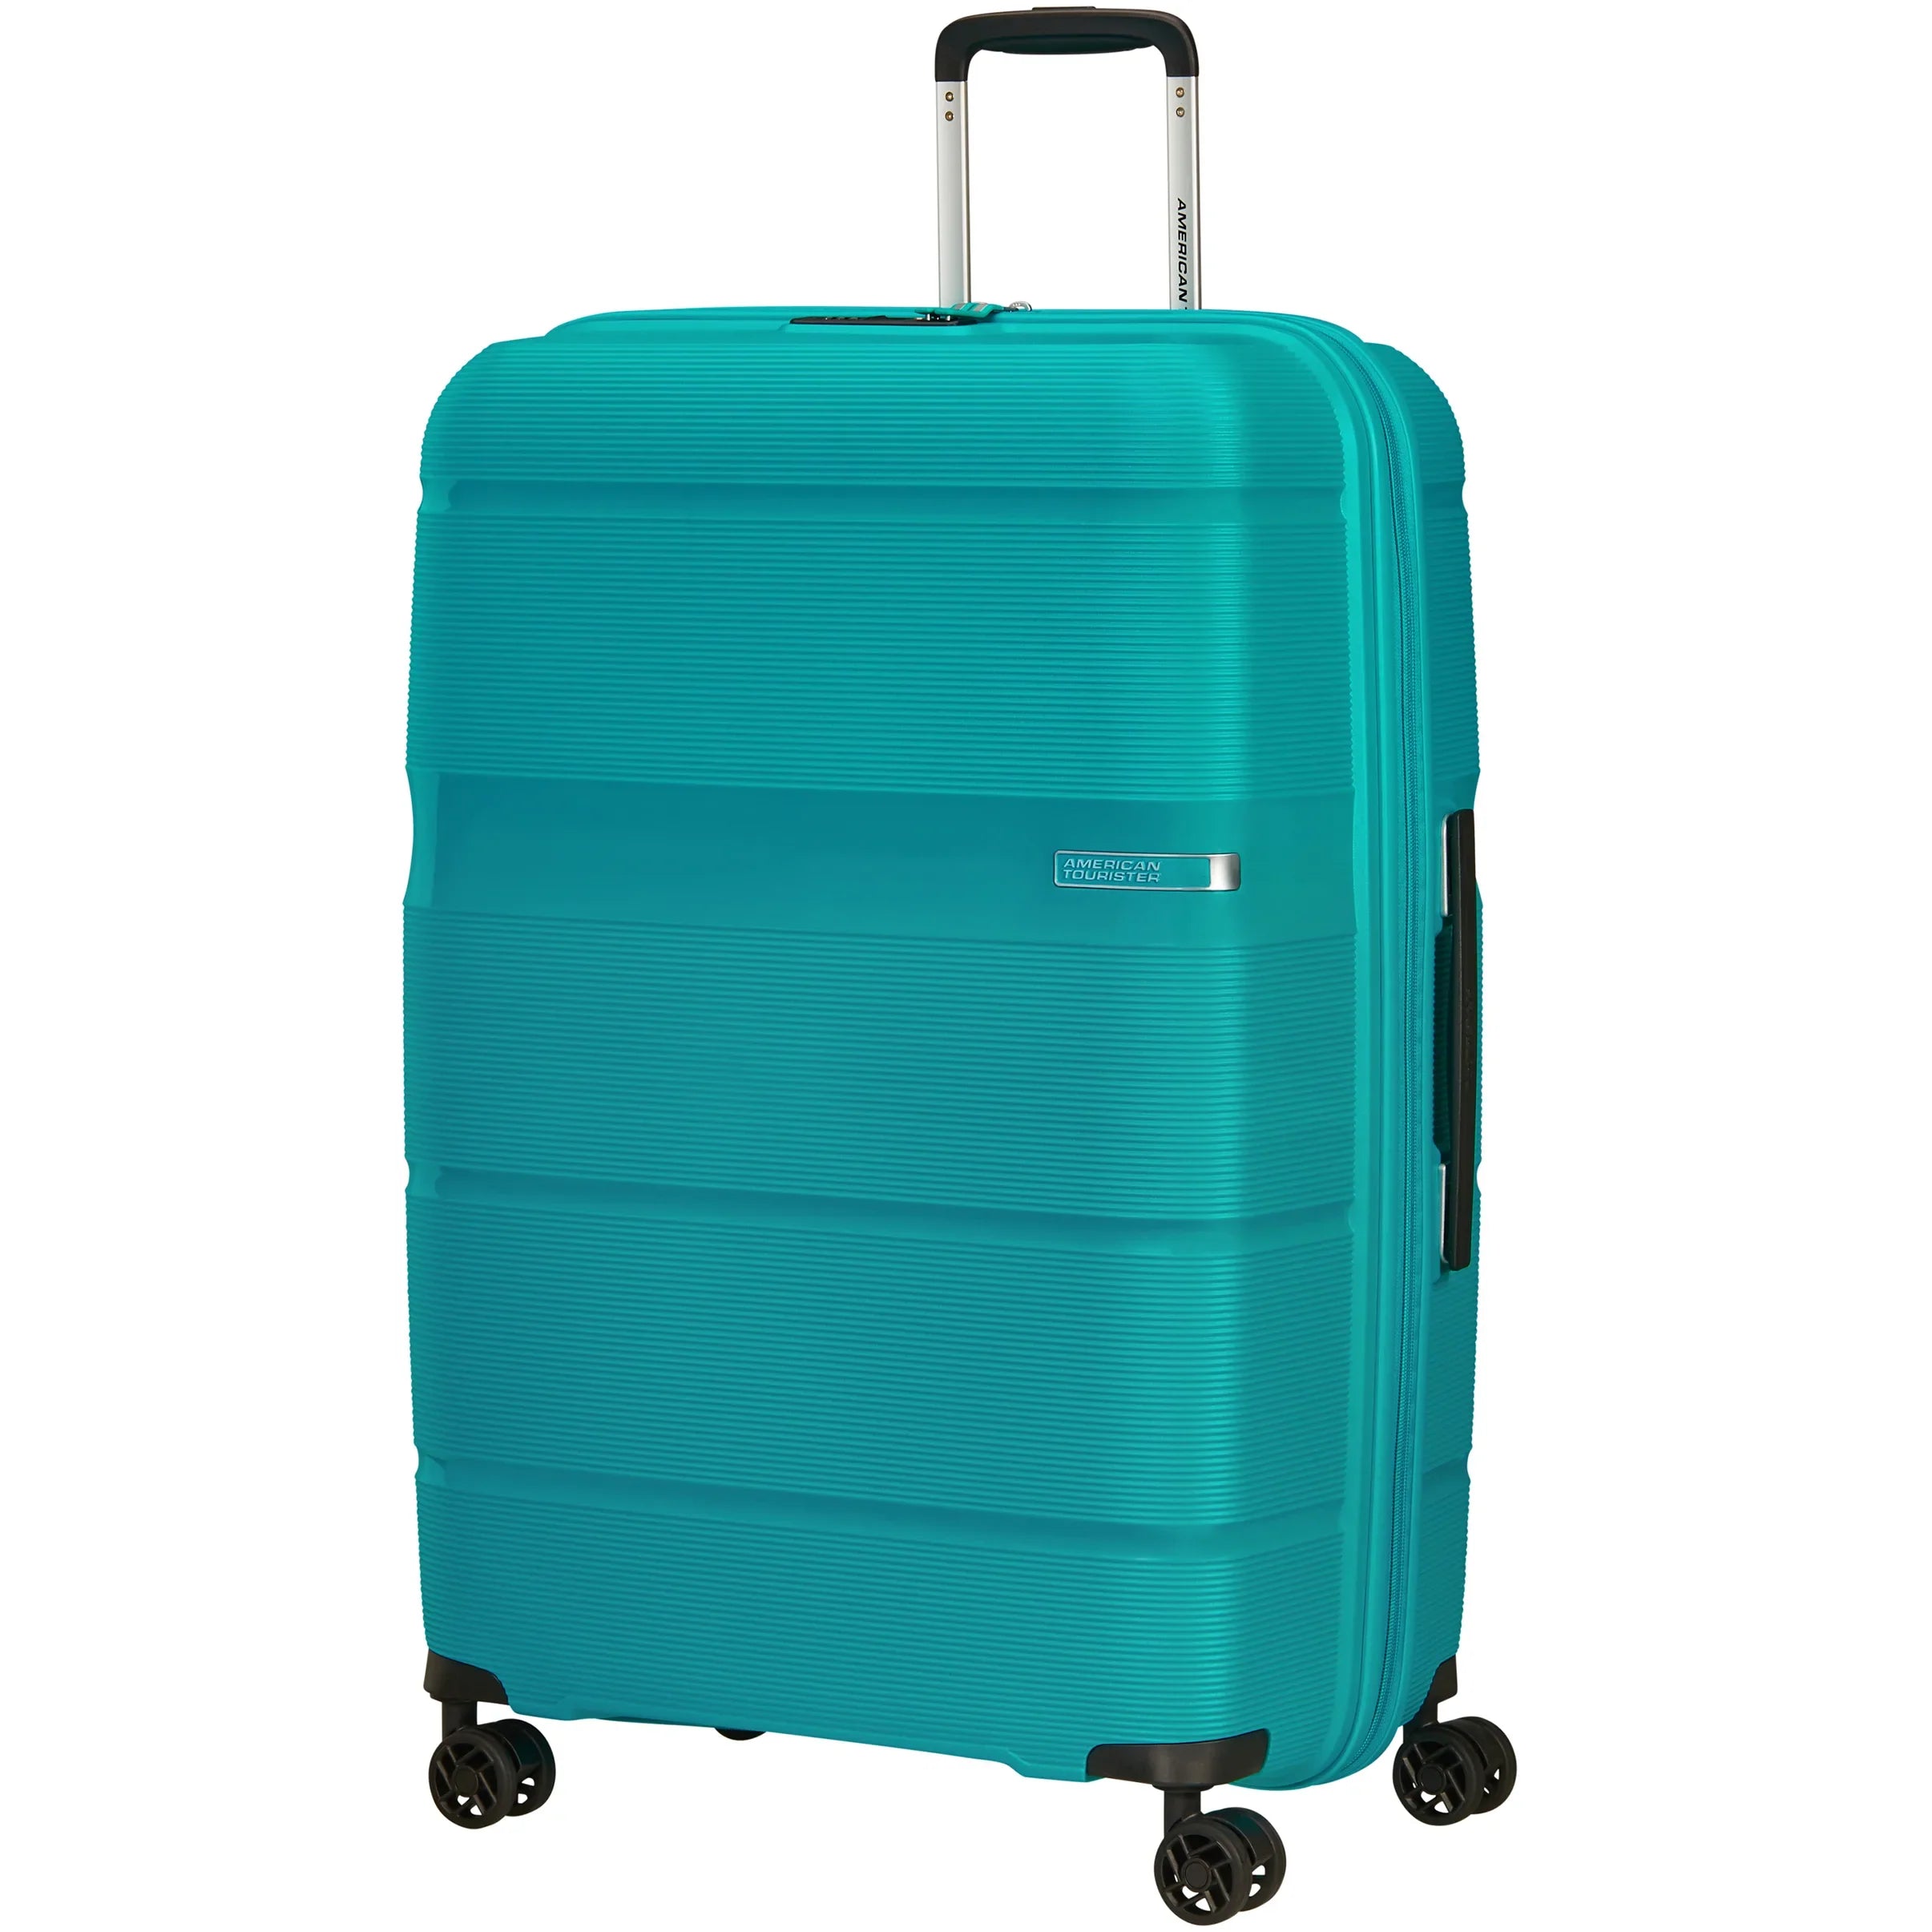 American Tourister Koffer 5 – Trolleys & Seite